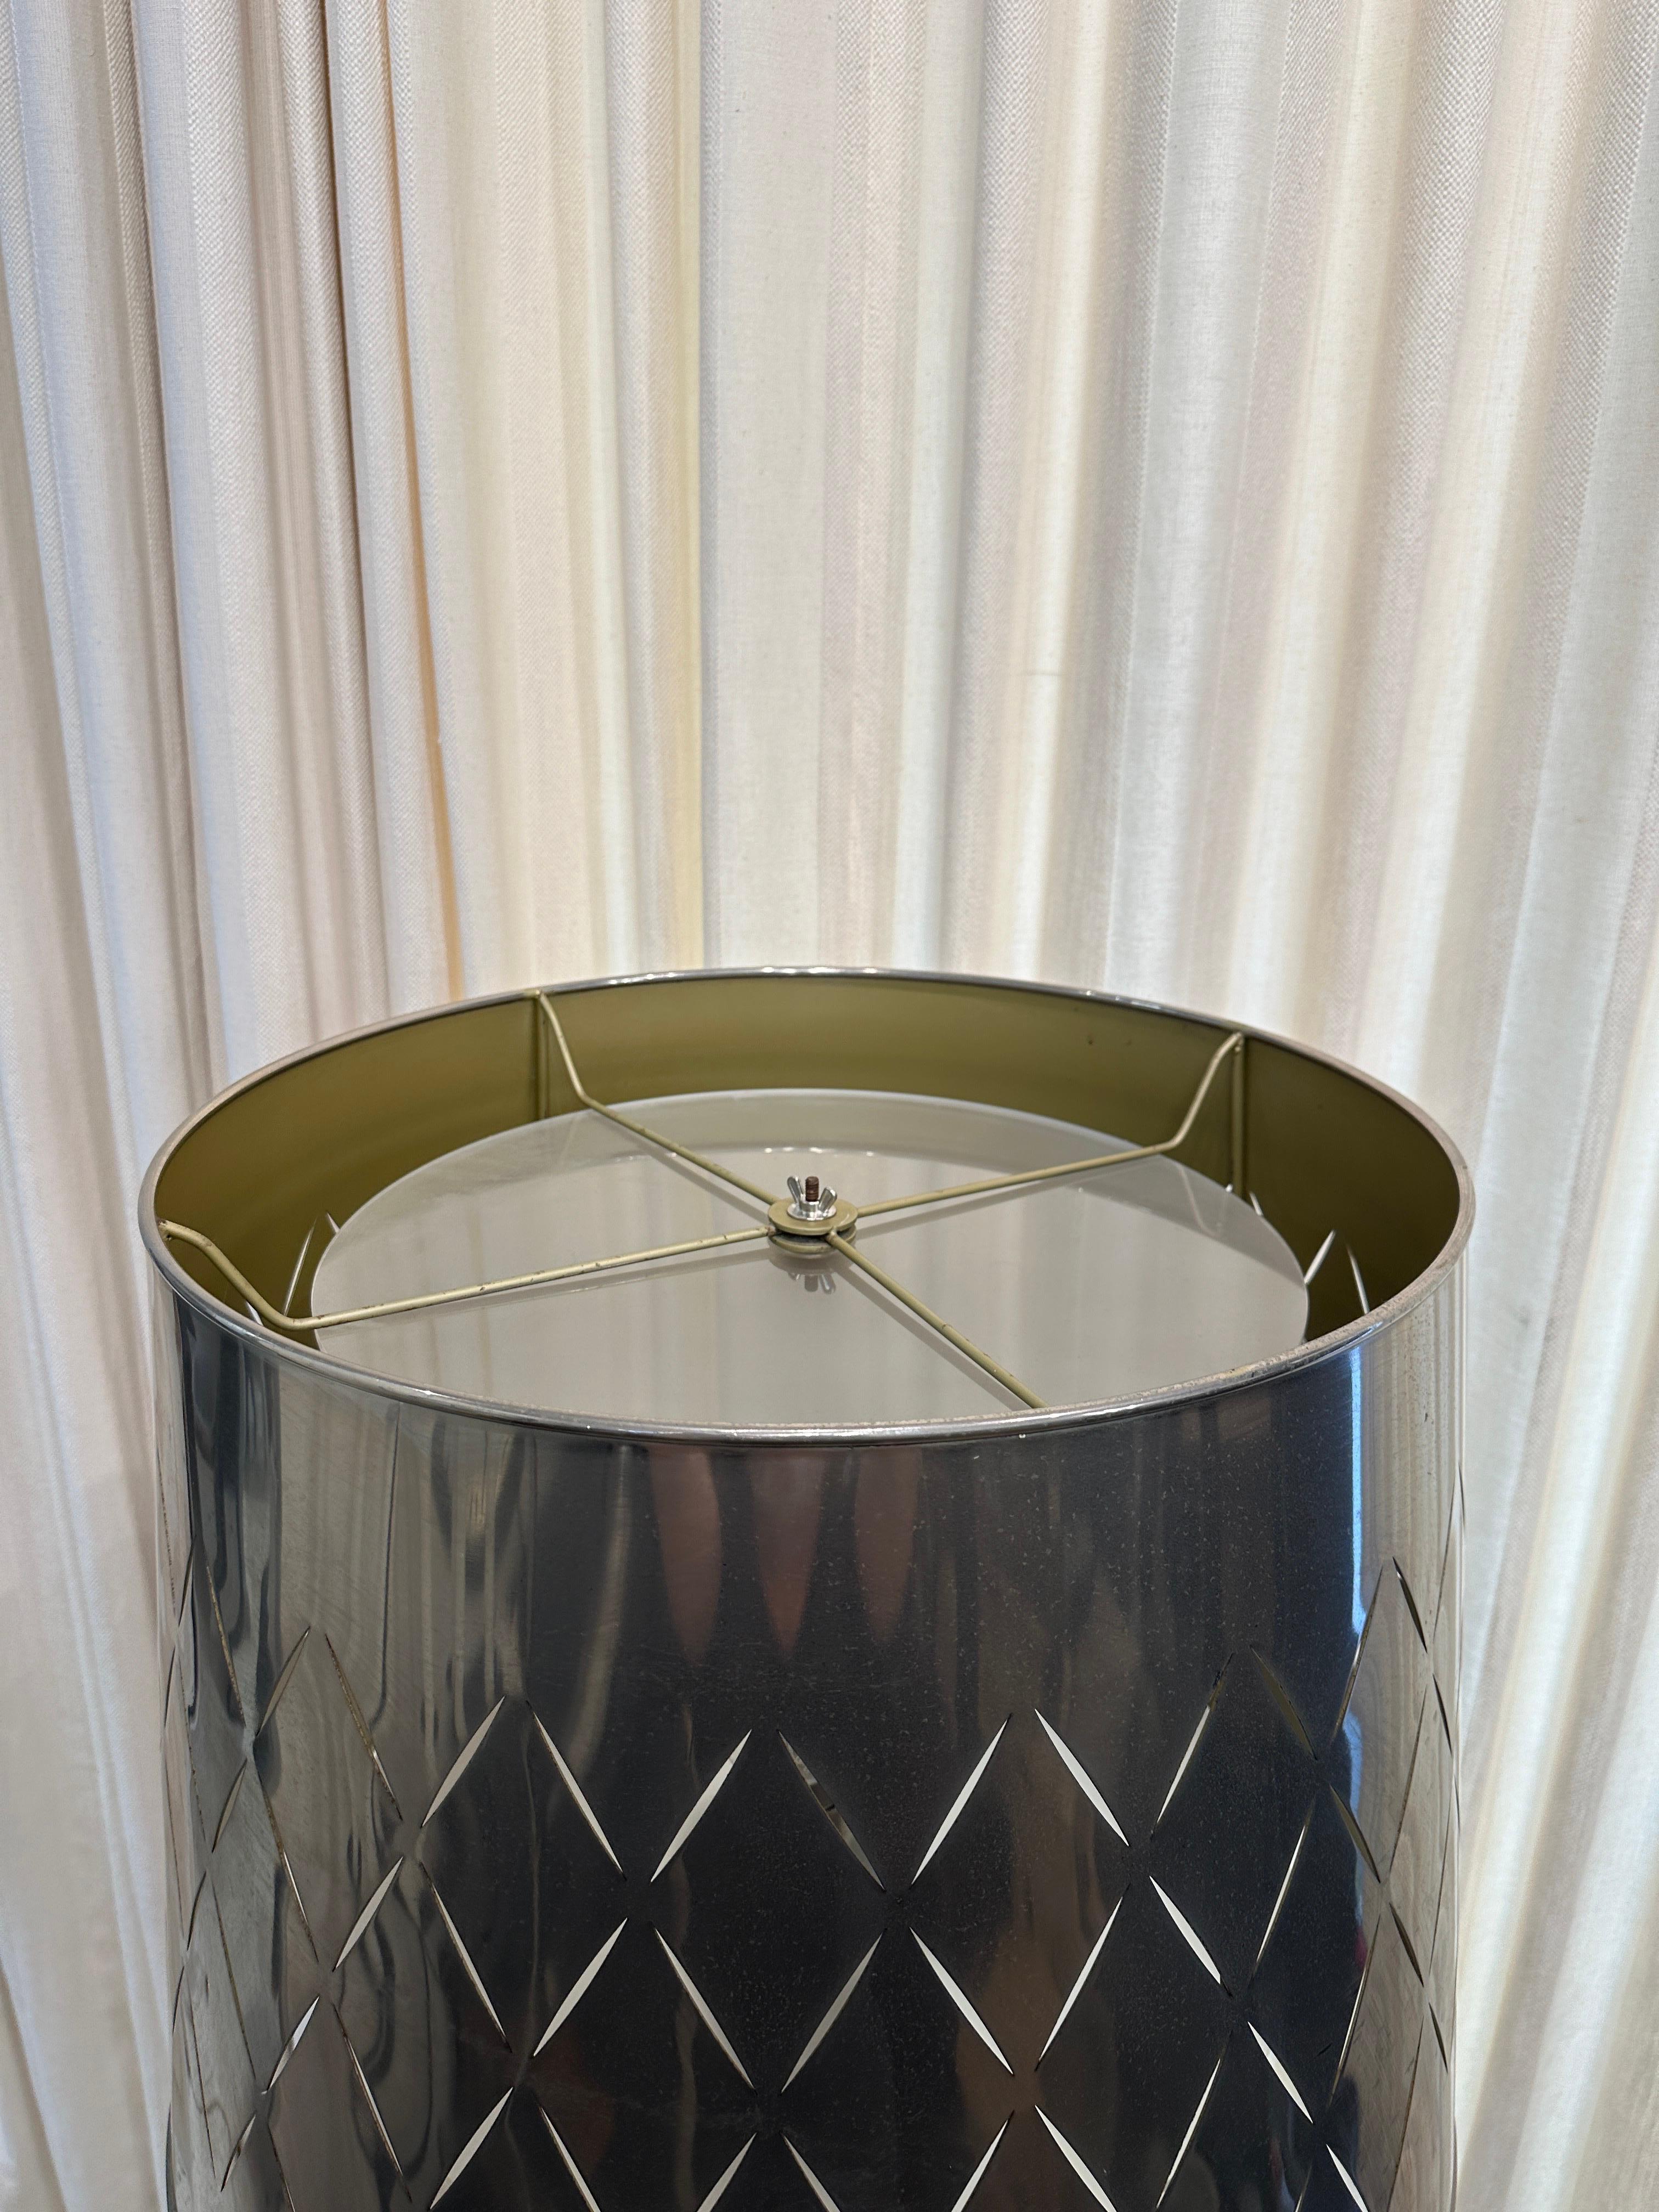 RARE Philippe Starck Etched Mirror Floor Lamp - Delano Hotel South Beach In Good Condition For Sale In East Hampton, NY